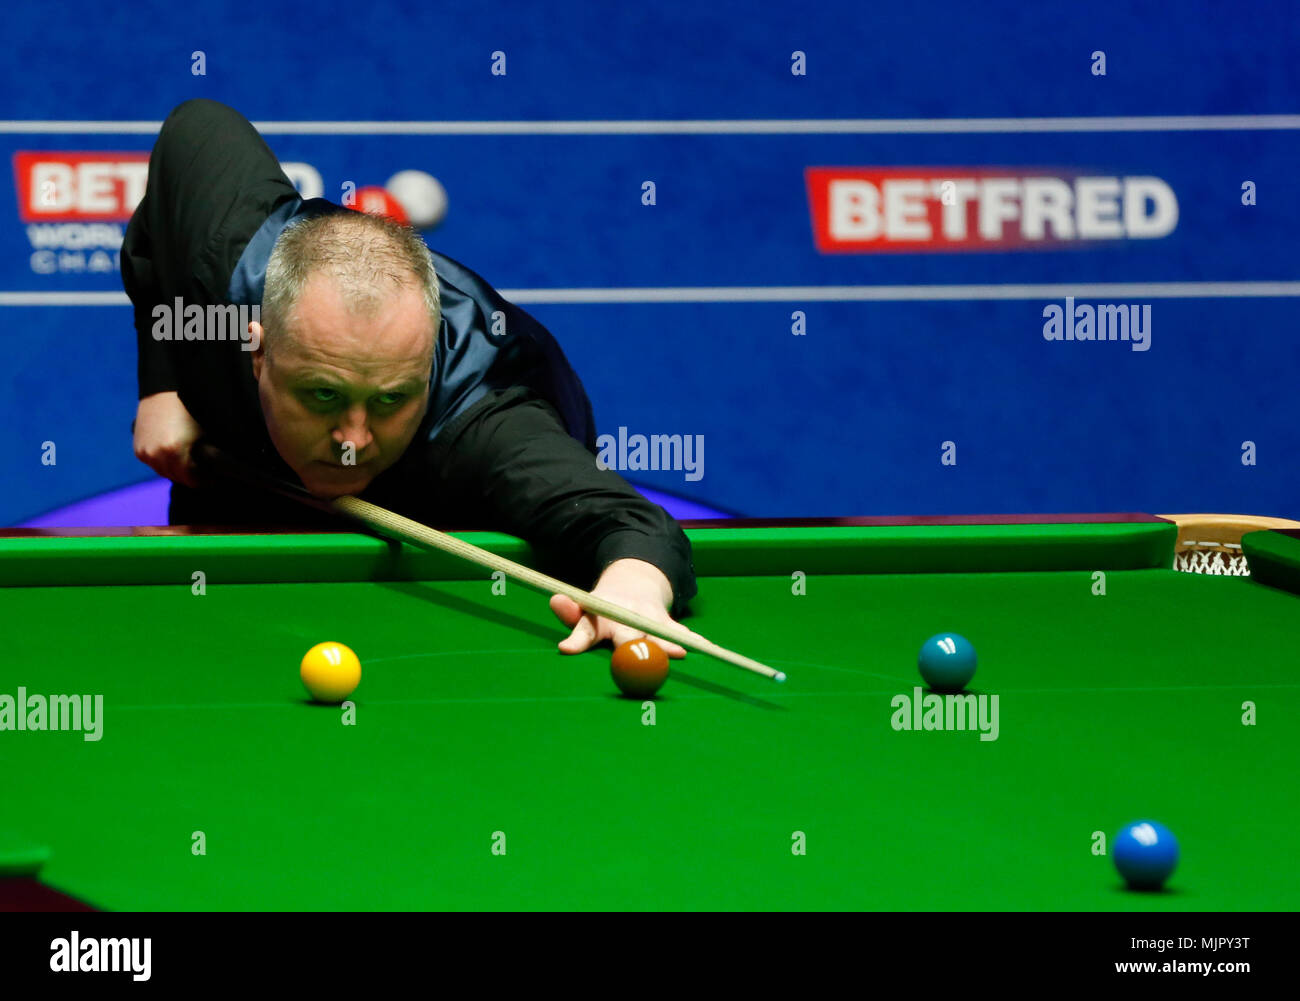 Sheffield, UK. 5th May, 2018. John Higgins of Scotland competes during the semifinal match against Kyren Wilson of England at the World Snooker Championship 2018 at the Crucible Theatre in Sheffield, UK, on May 5, 2018. Credit: Han Yan/Xinhua/Alamy Live News Stock Photo